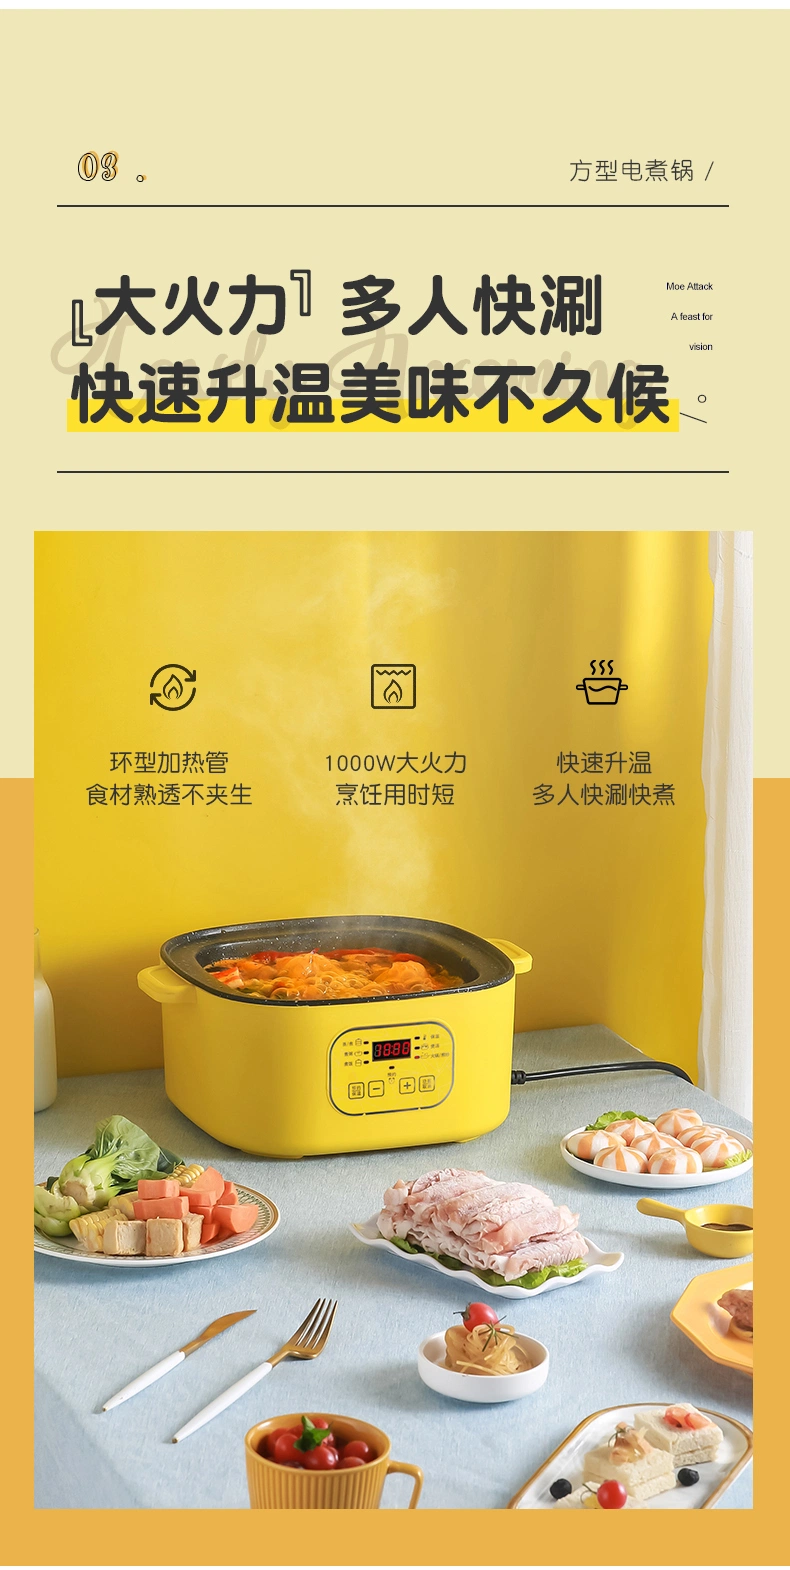 Large Capacity Electric Hot Pan Multi-Functional Home Dormitory Non-Stick Electric Frying Pan